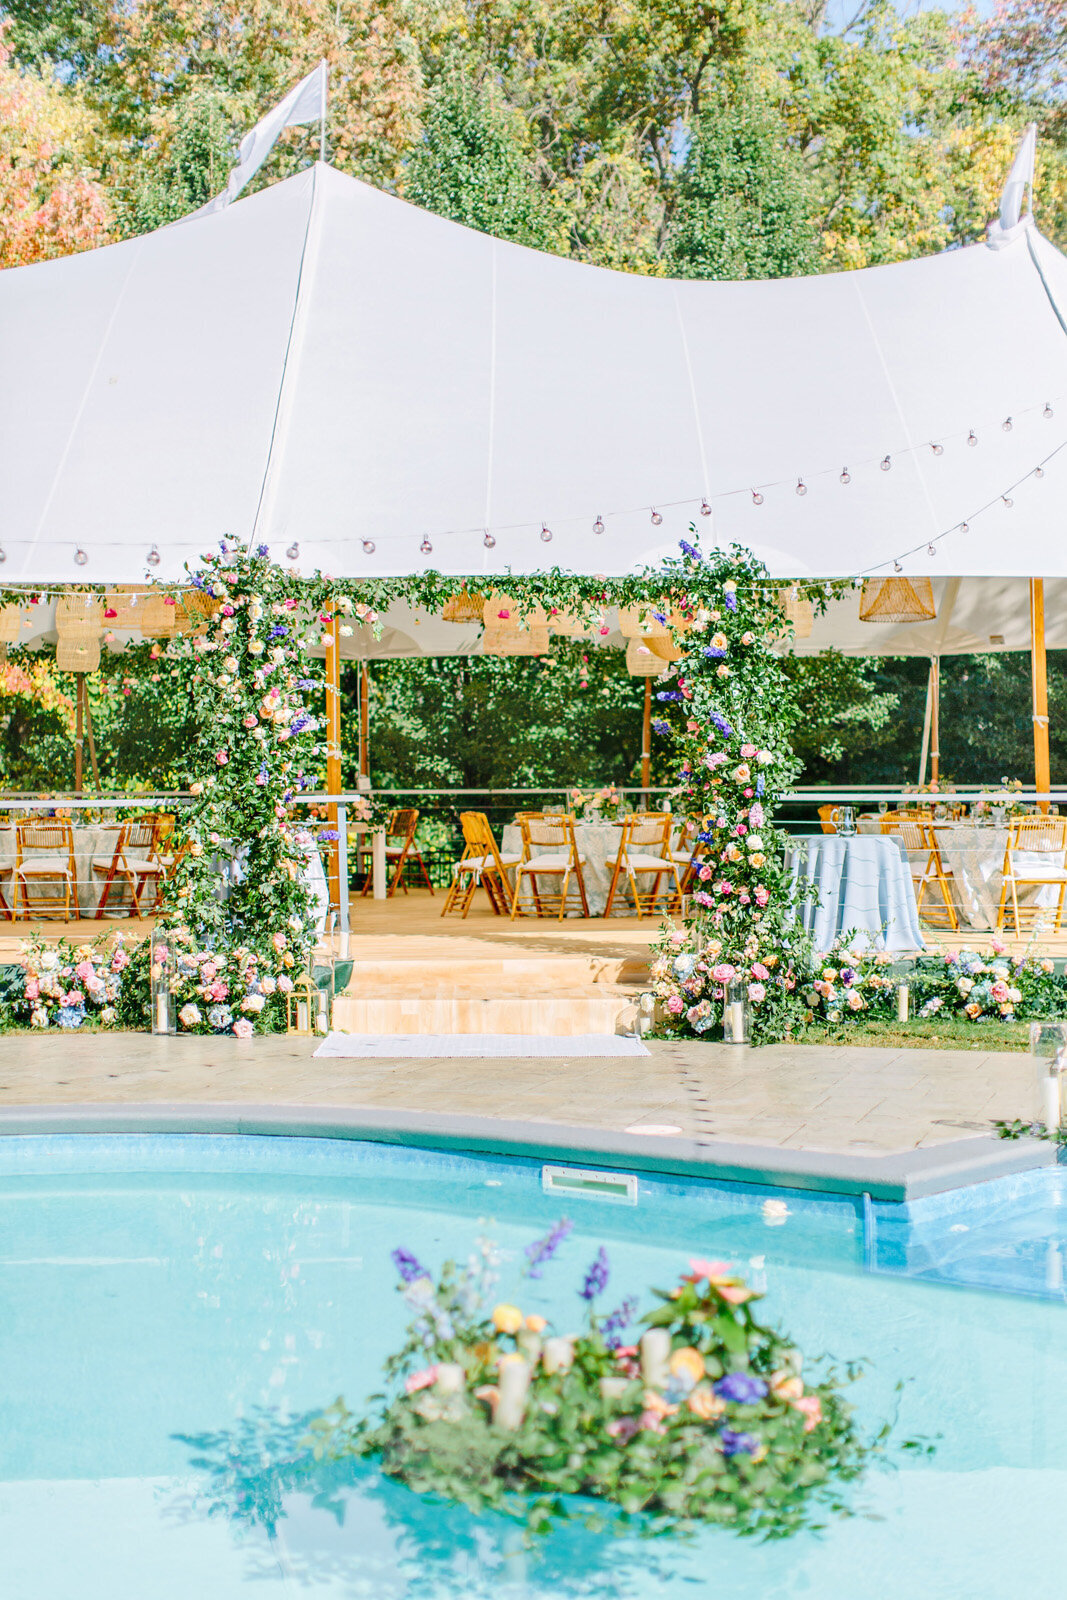 Kate-Murtaugh-Events-private-estate-Sperry-tent-wedding-planner-pool-floral-arch